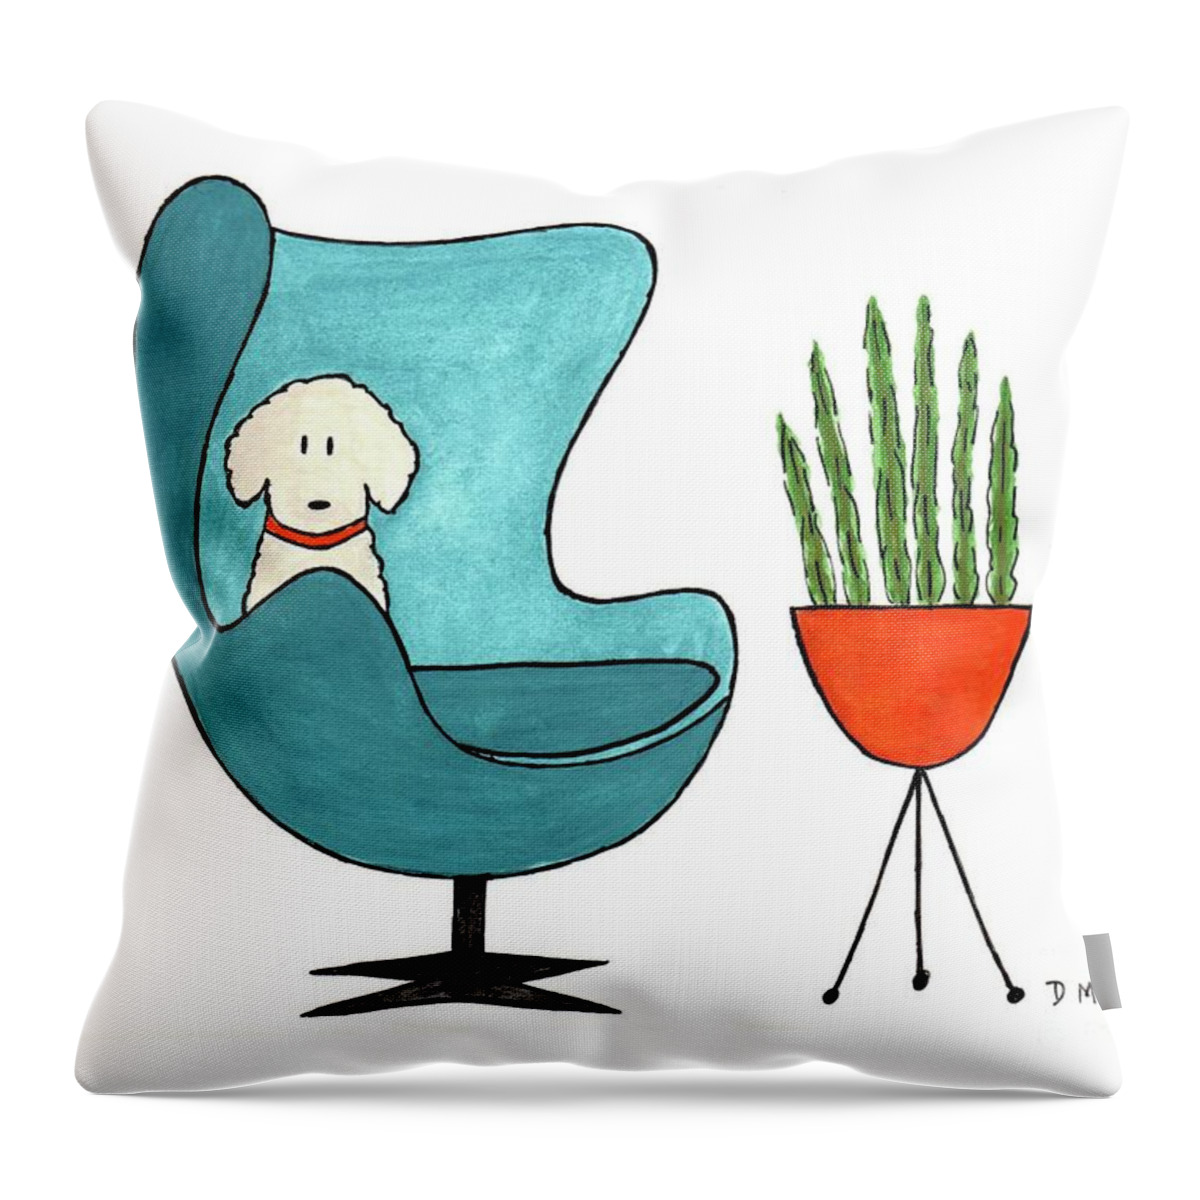 Arne Jacobsen Egg Chair Throw Pillow featuring the painting Cute Dog in Teal Arne Jacobsen Chair by Donna Mibus